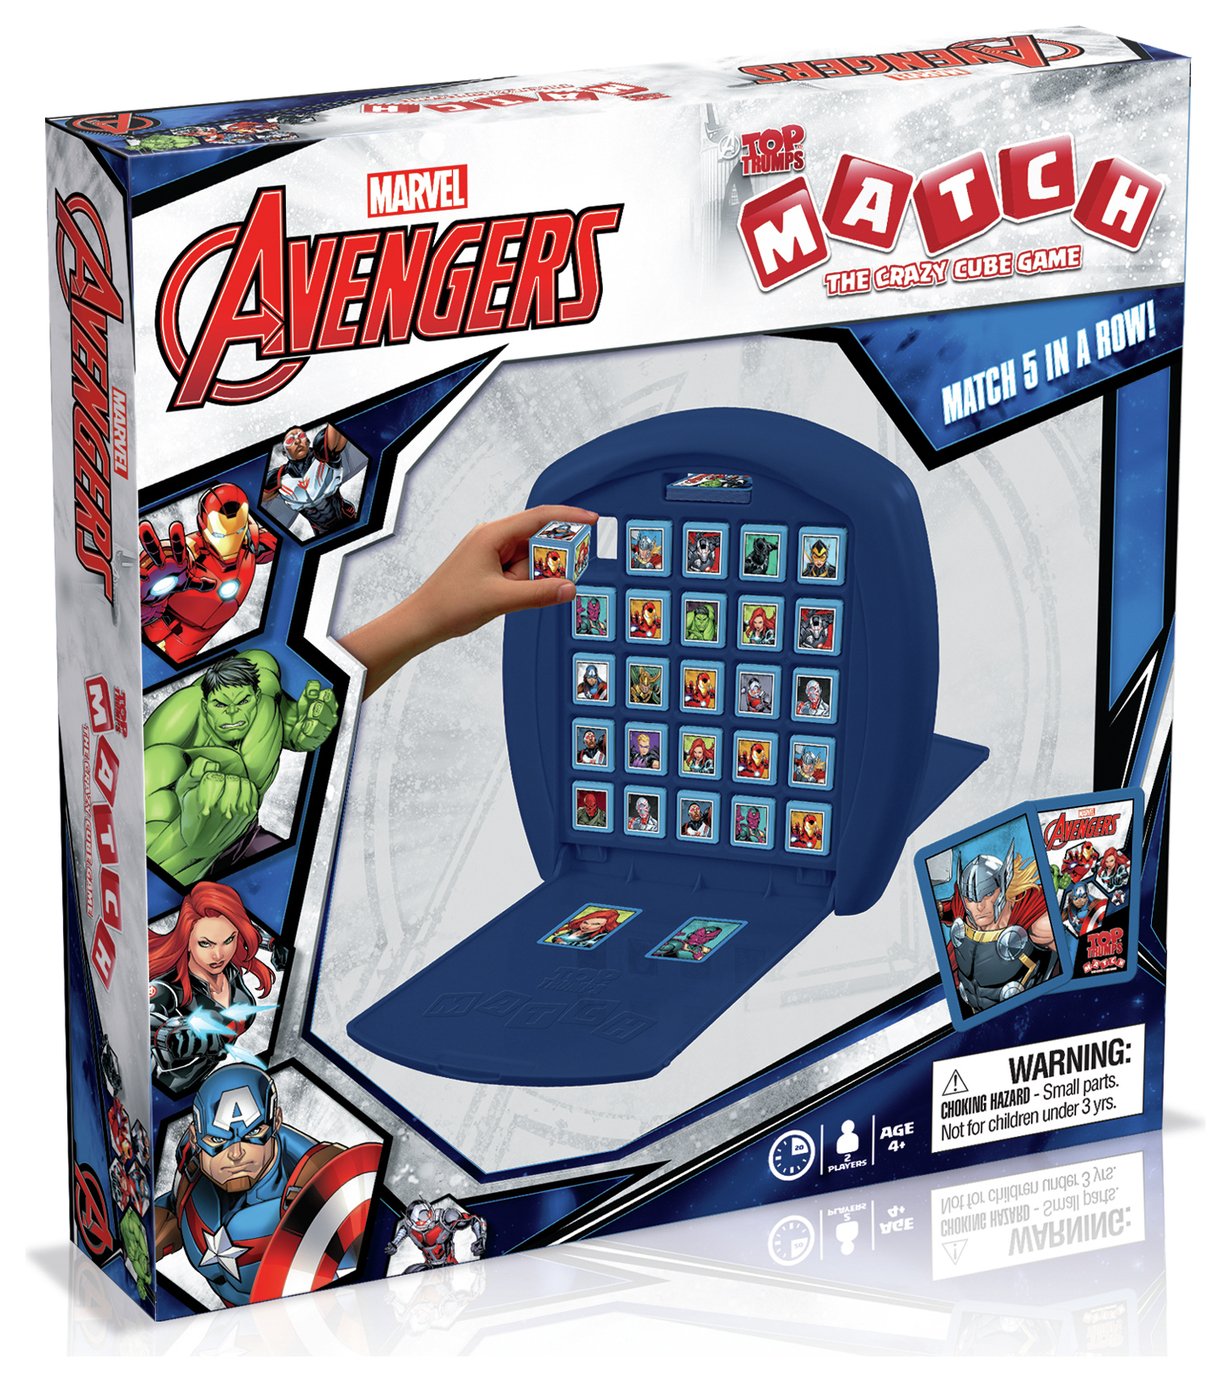 Top Trumps The Crazy Cube Game Marvel Avengers Assemble Review